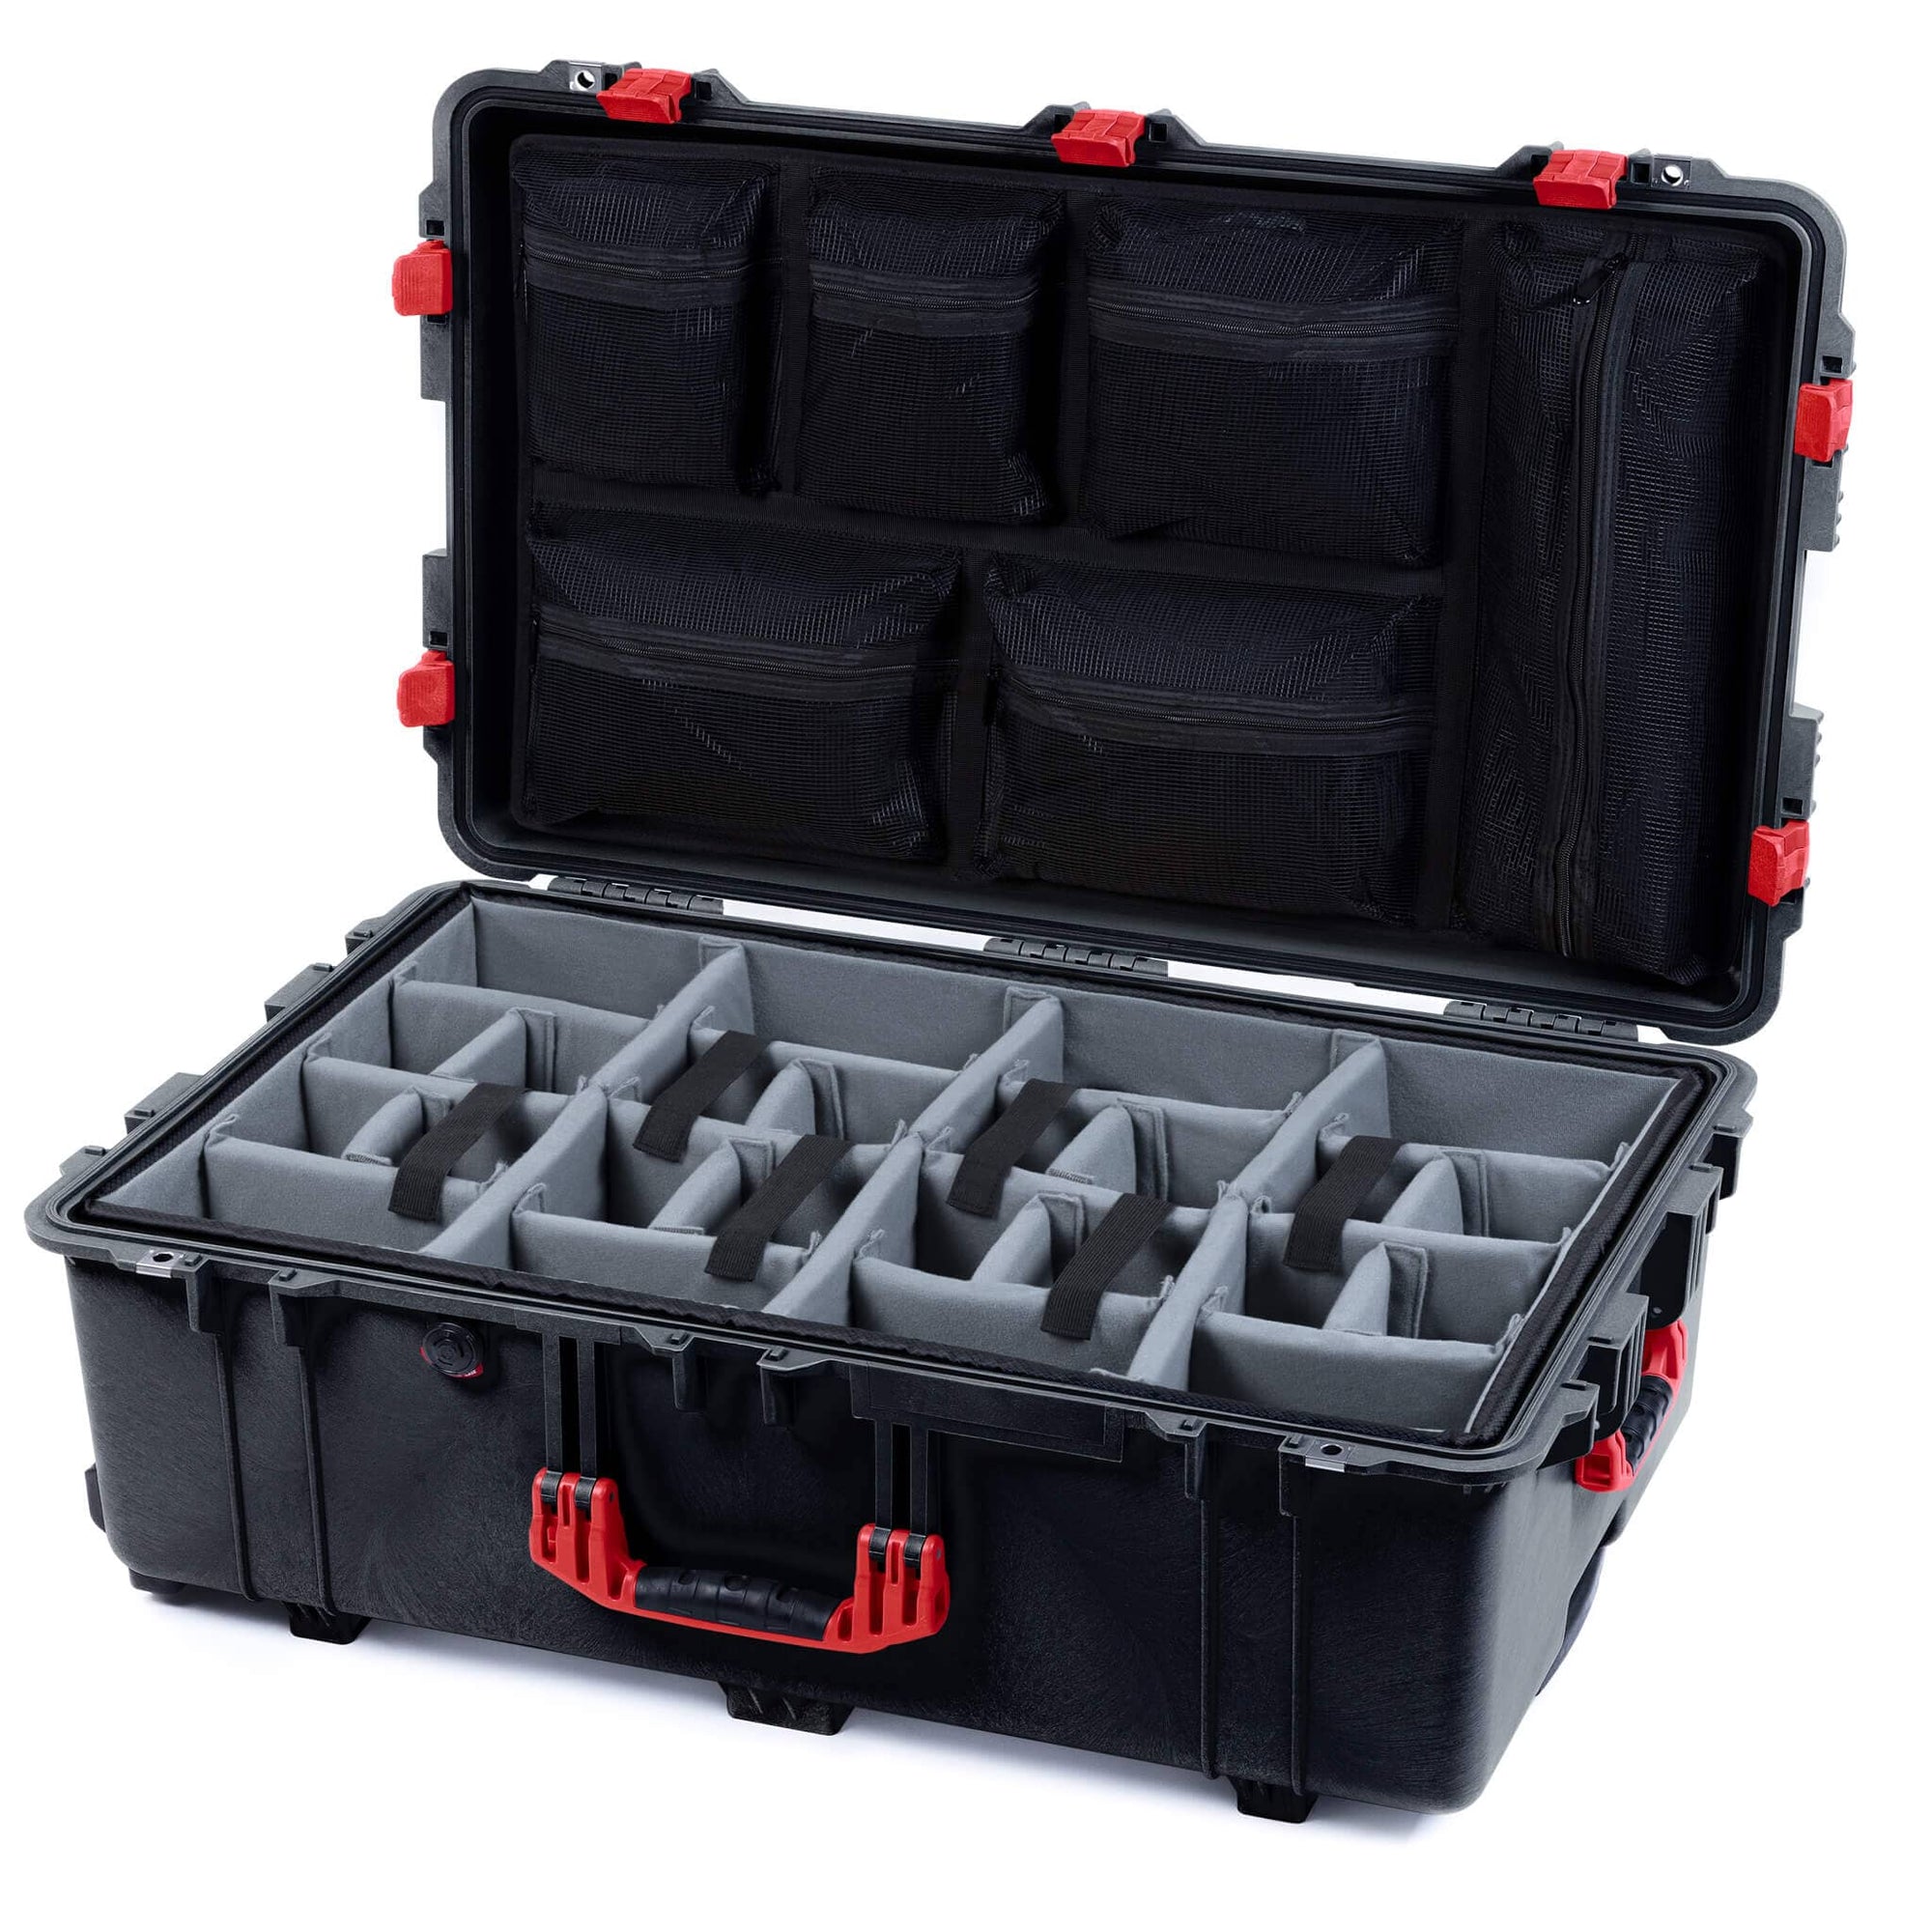 Black & Red Pelican 1650 Case - Double-Throw Latches